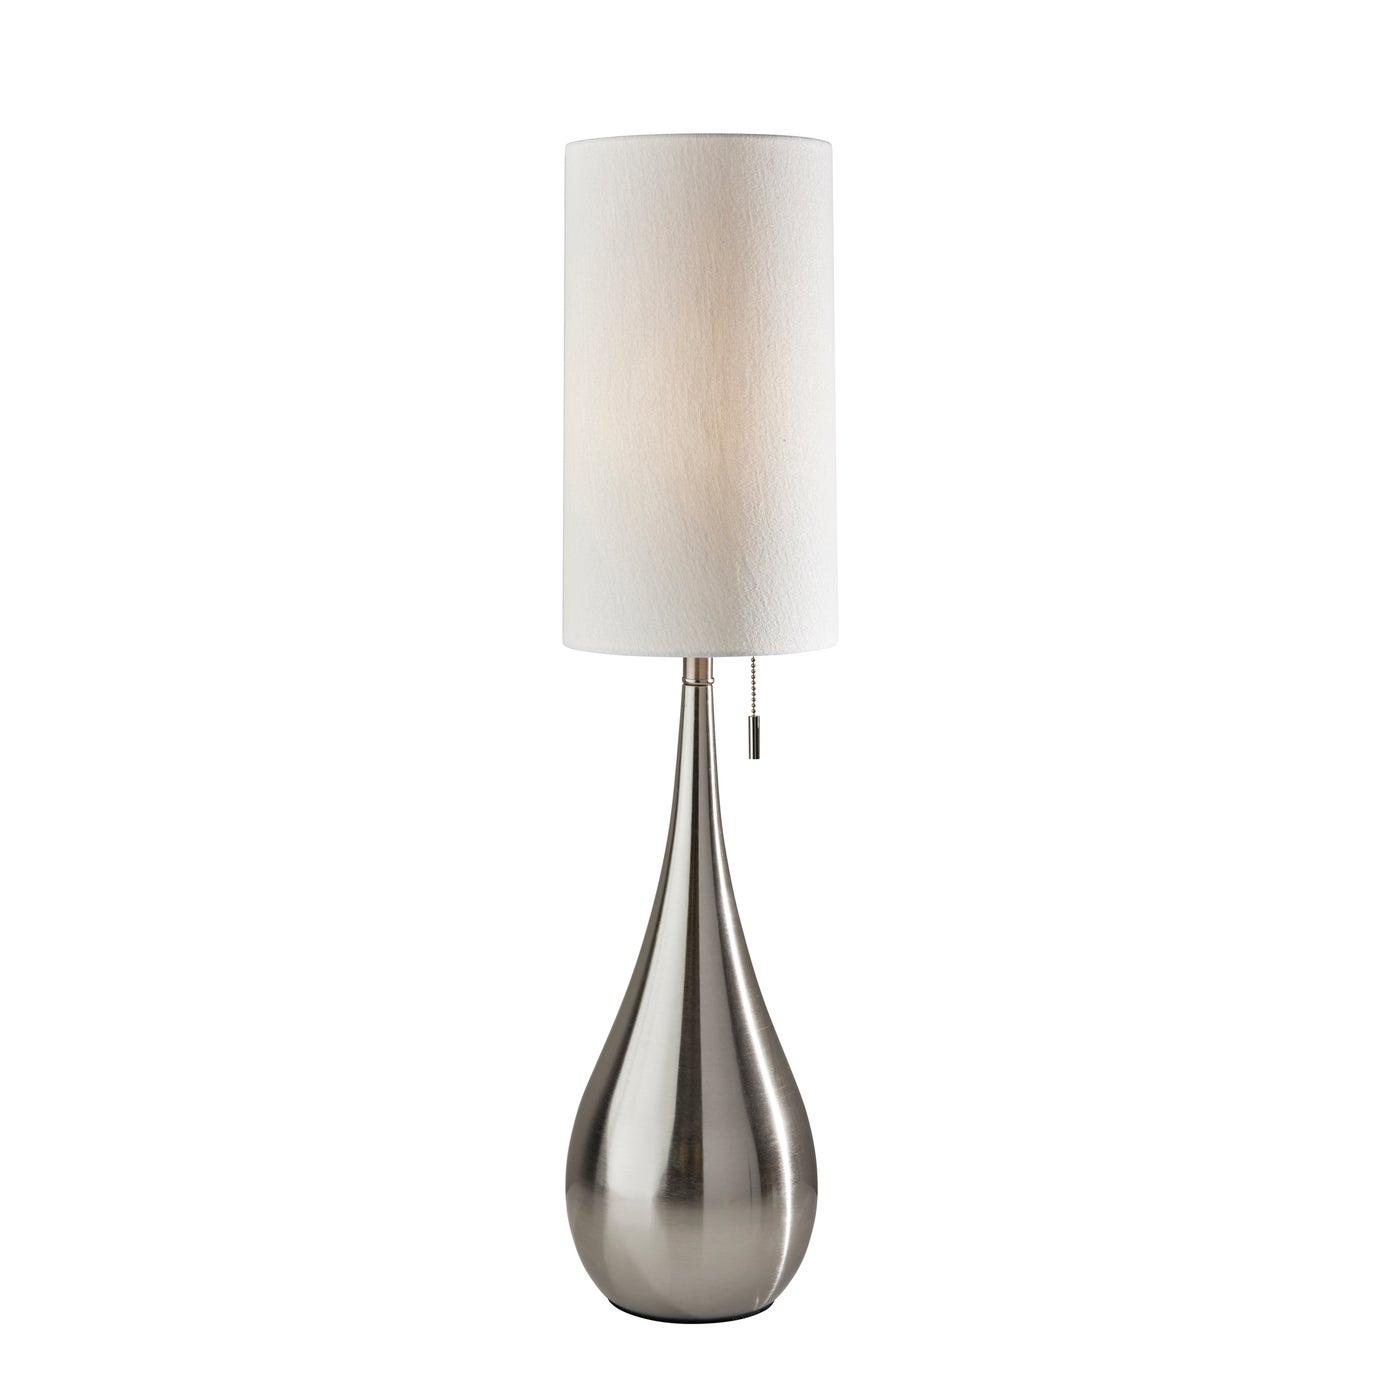 Adesso Home - 1536-22 - Table Lamp - Christina - Brushed Steel